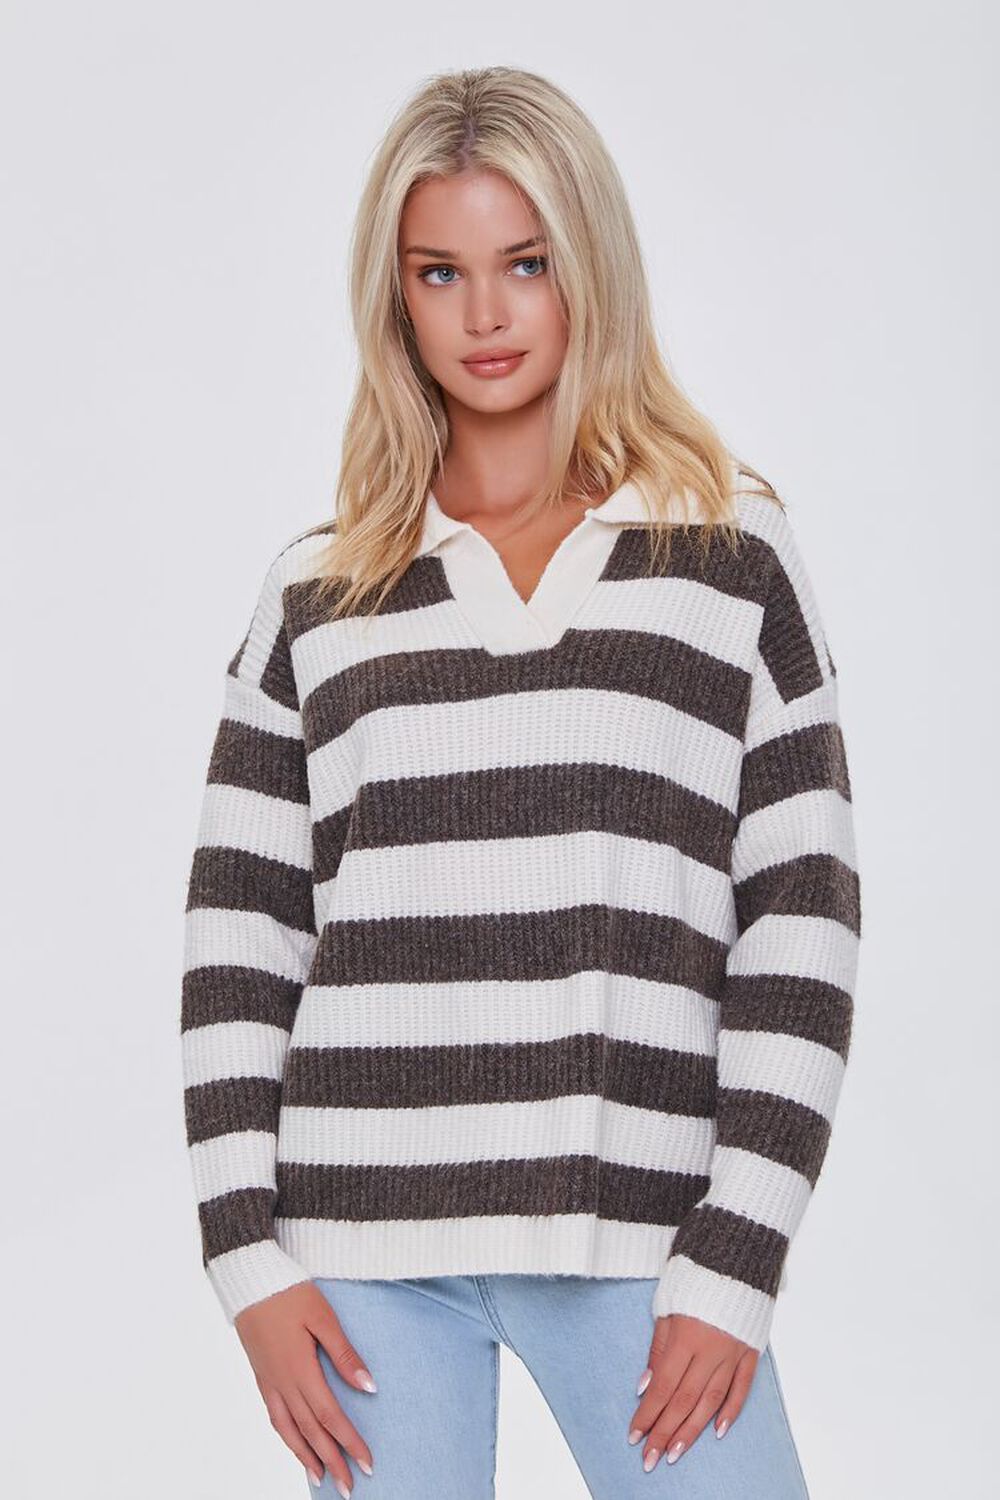 CREAM/BROWN Striped Sweater-Knit Pullover, image 1